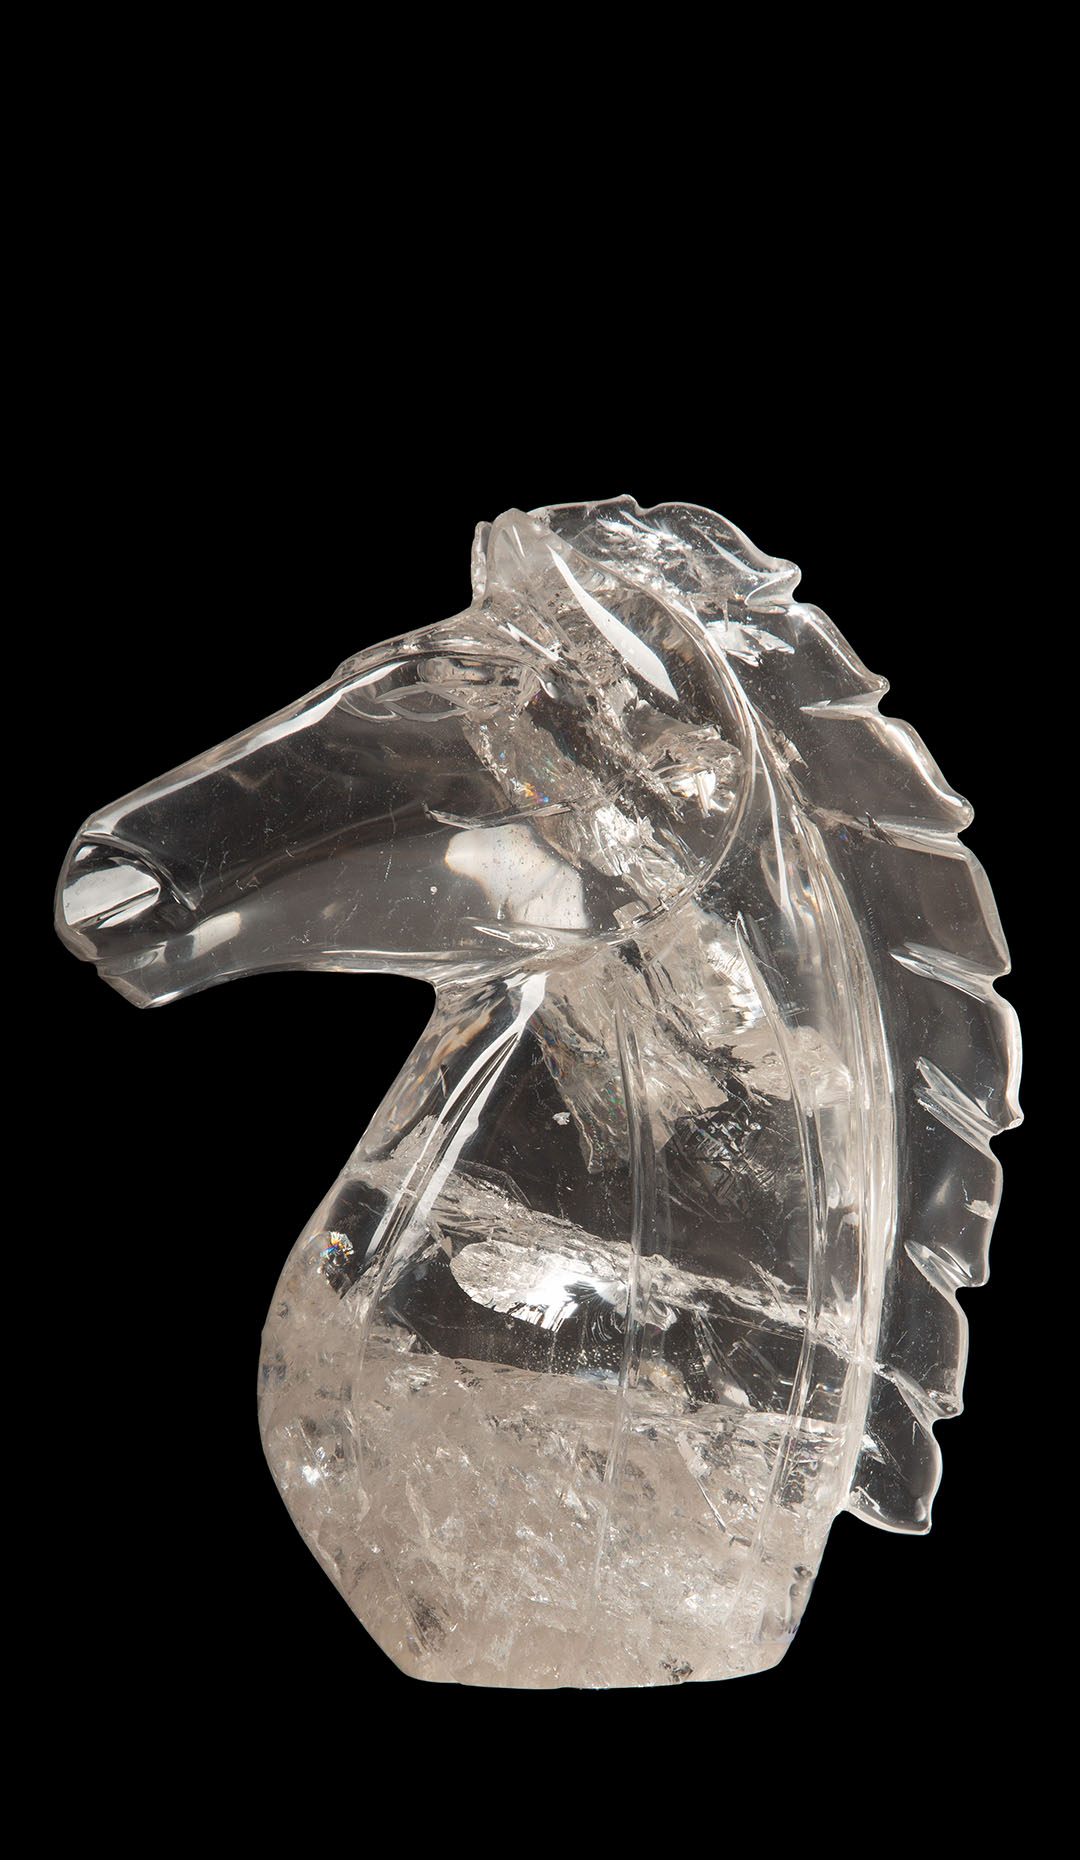 Enchanting Equestrian Elegance: Hand-Carved Rock Crystal Horse Head from Brazil